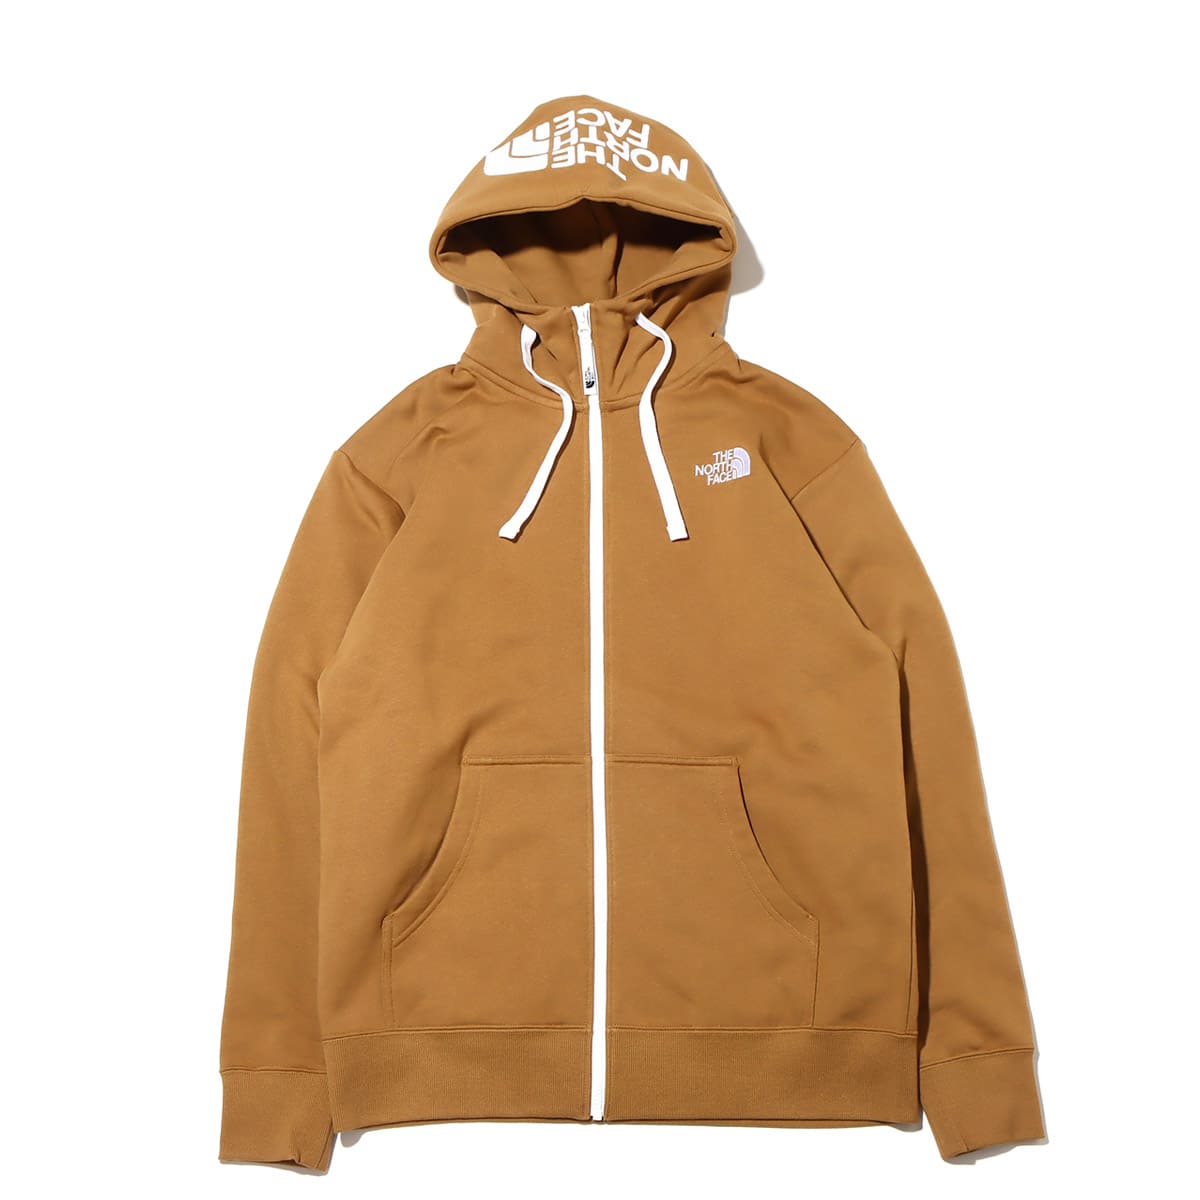 THE NORTH FACE REARVIEW FULL ZIP HOODIE ユーティリティブラウン 23SS-I